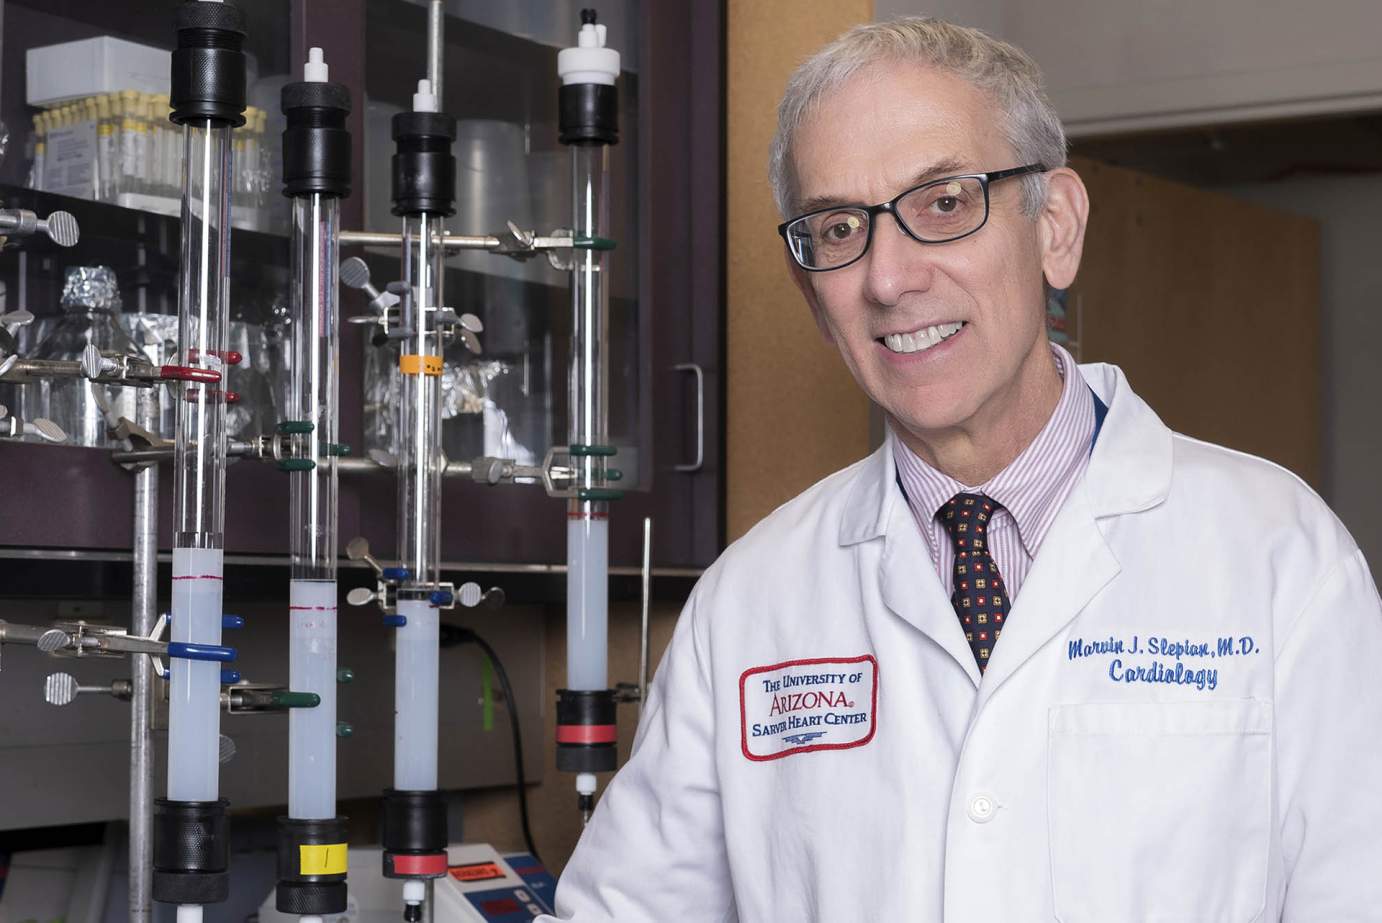 Marvin Slepian, MD, JD, is a Regents Professor of Medicine and Medical Imaging in the University of Arizona College of Medicine - Tucson and Biomedical Engineering at the UArizona College of Engineering and recently earned his law degree.